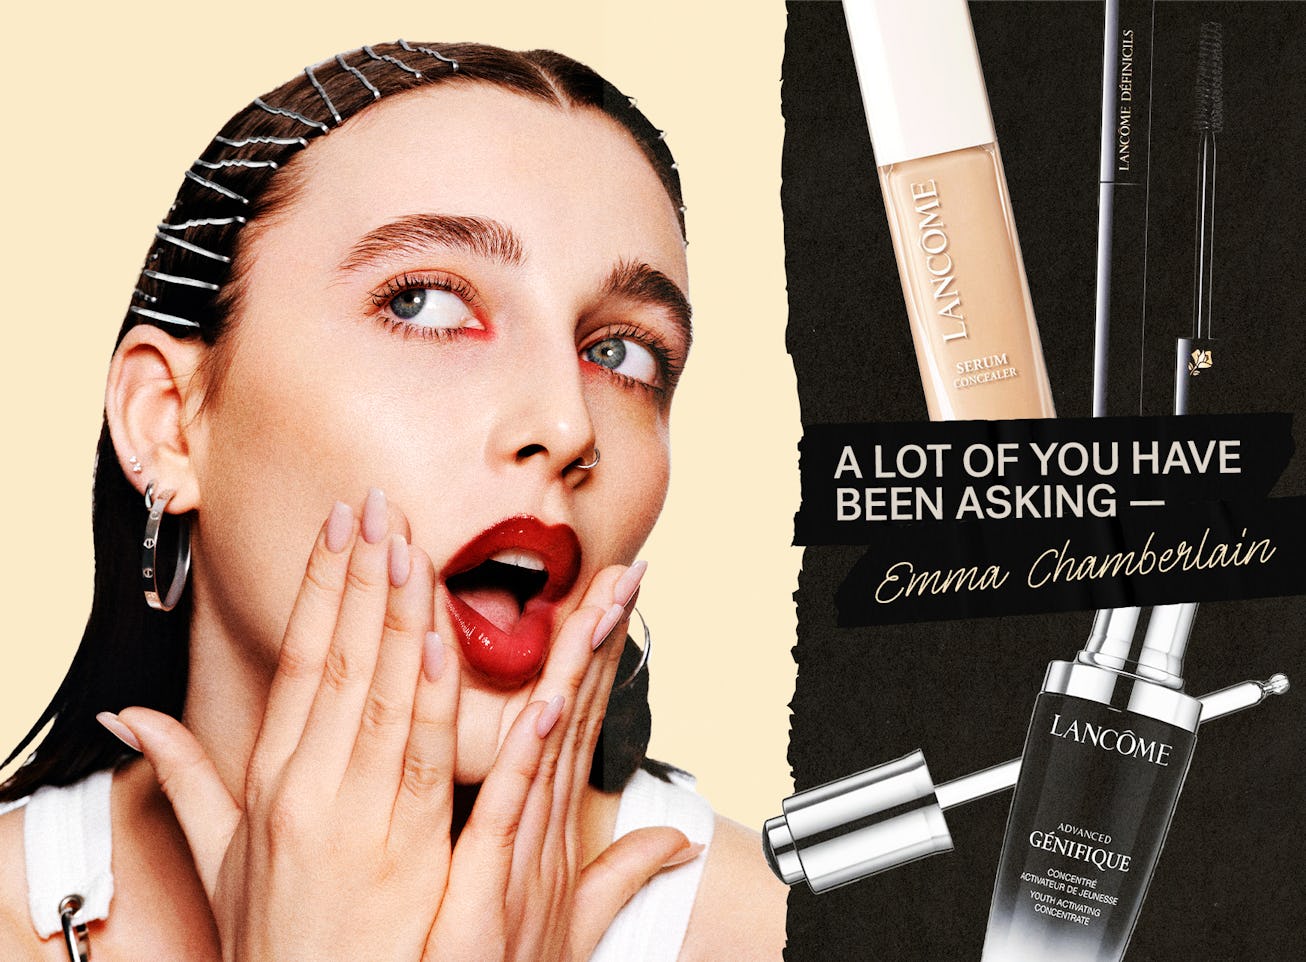 Ad featuring a surprised woman with beauty products from Lancome, including text "A lot of you have ...